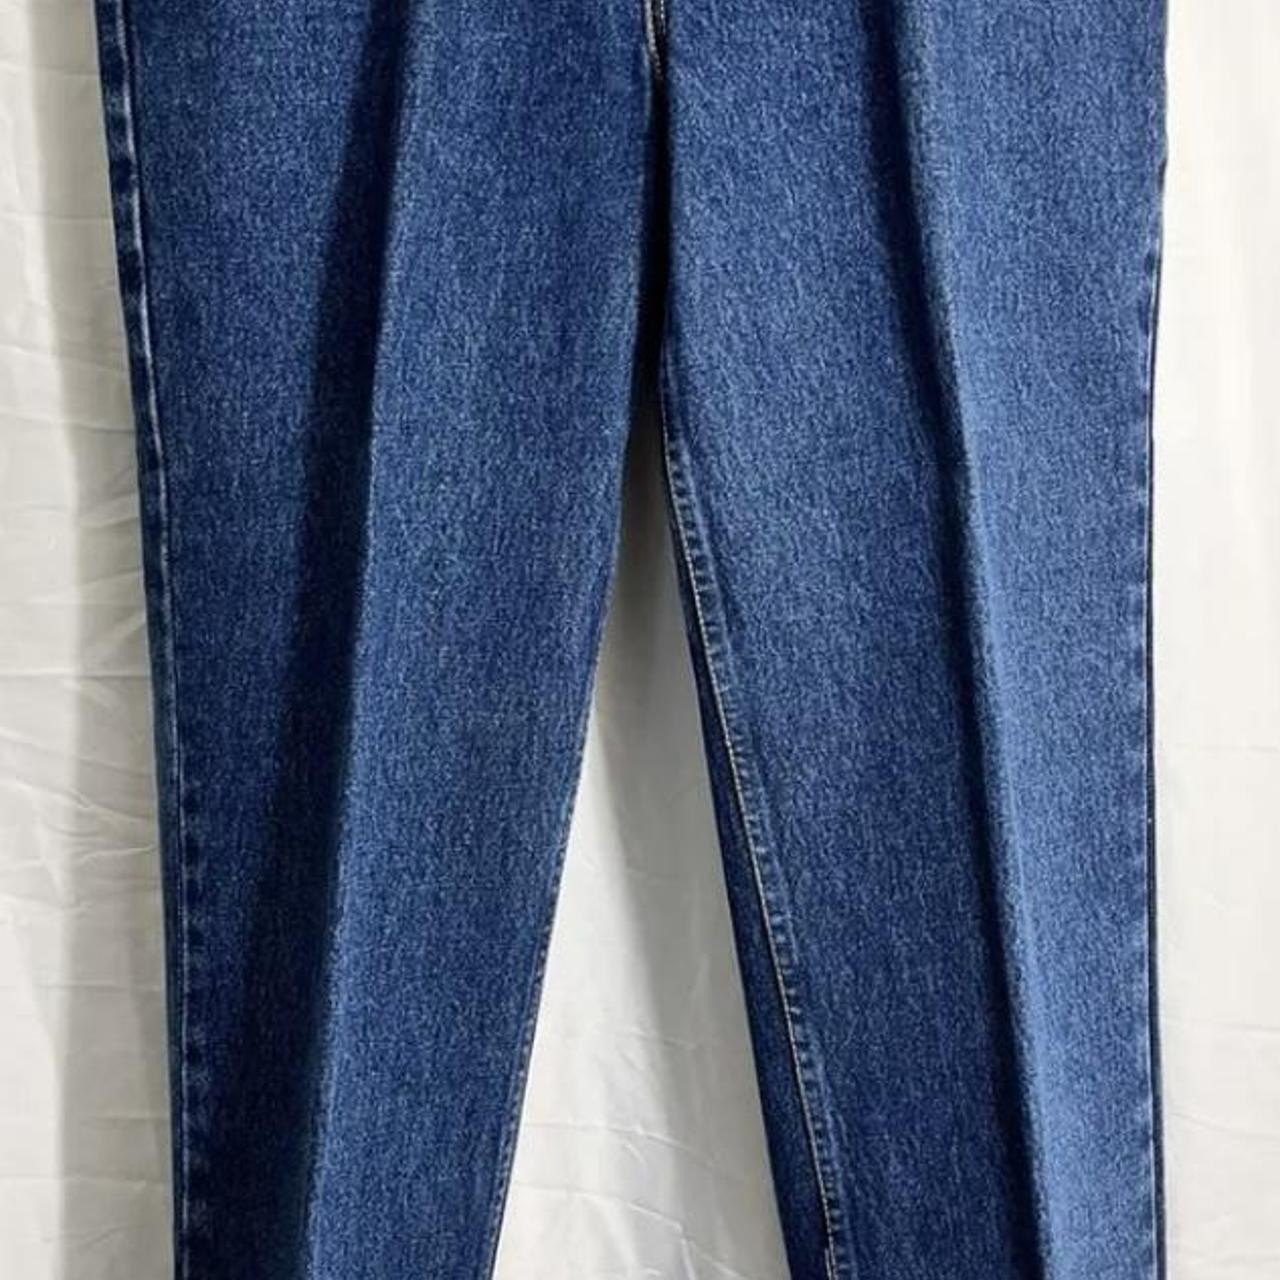 These jeans are in are amazing condition and are... - Depop